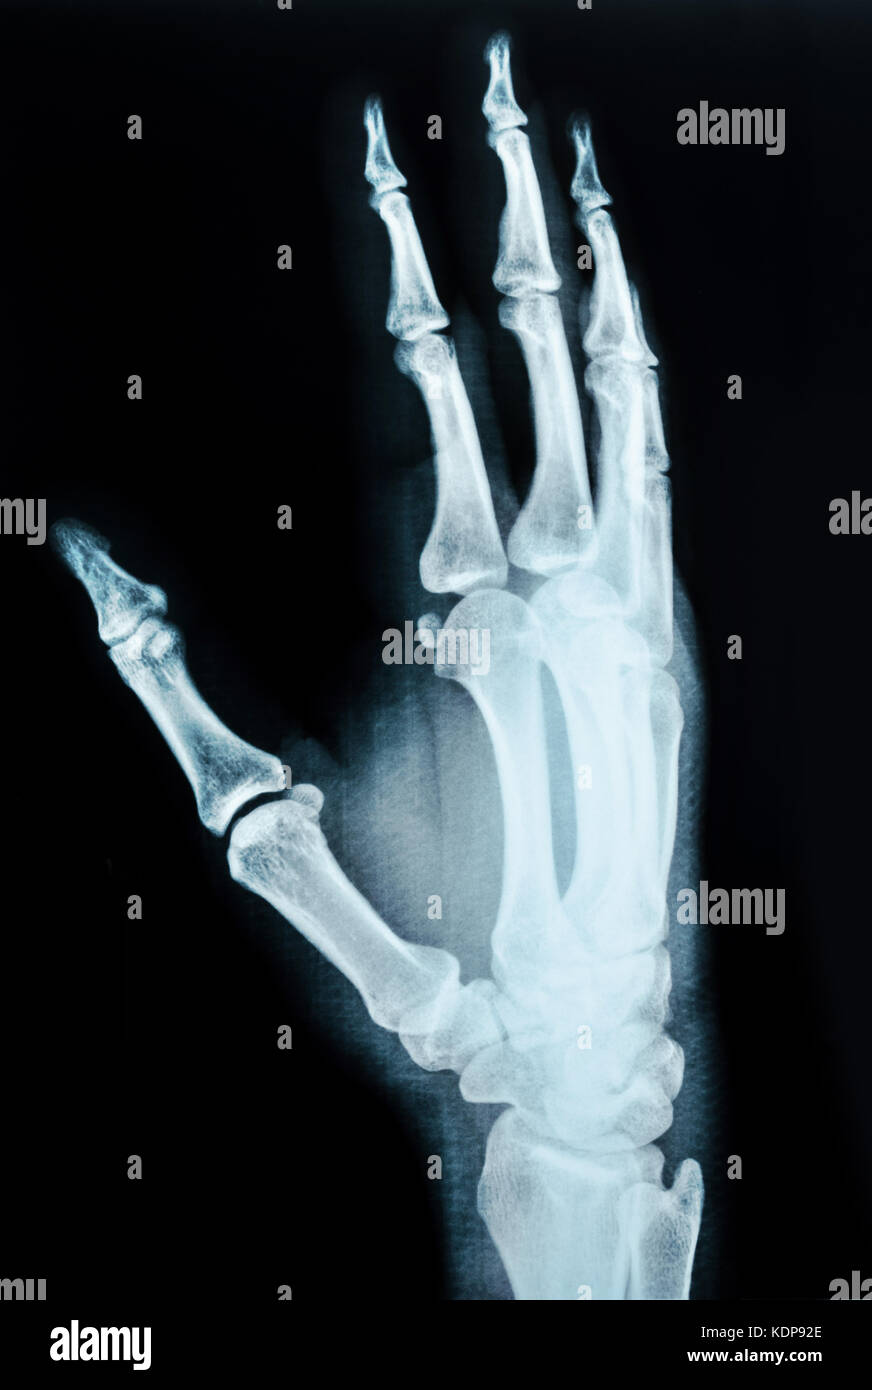 black and white photo of x-ray picture of human hands Stock Photo